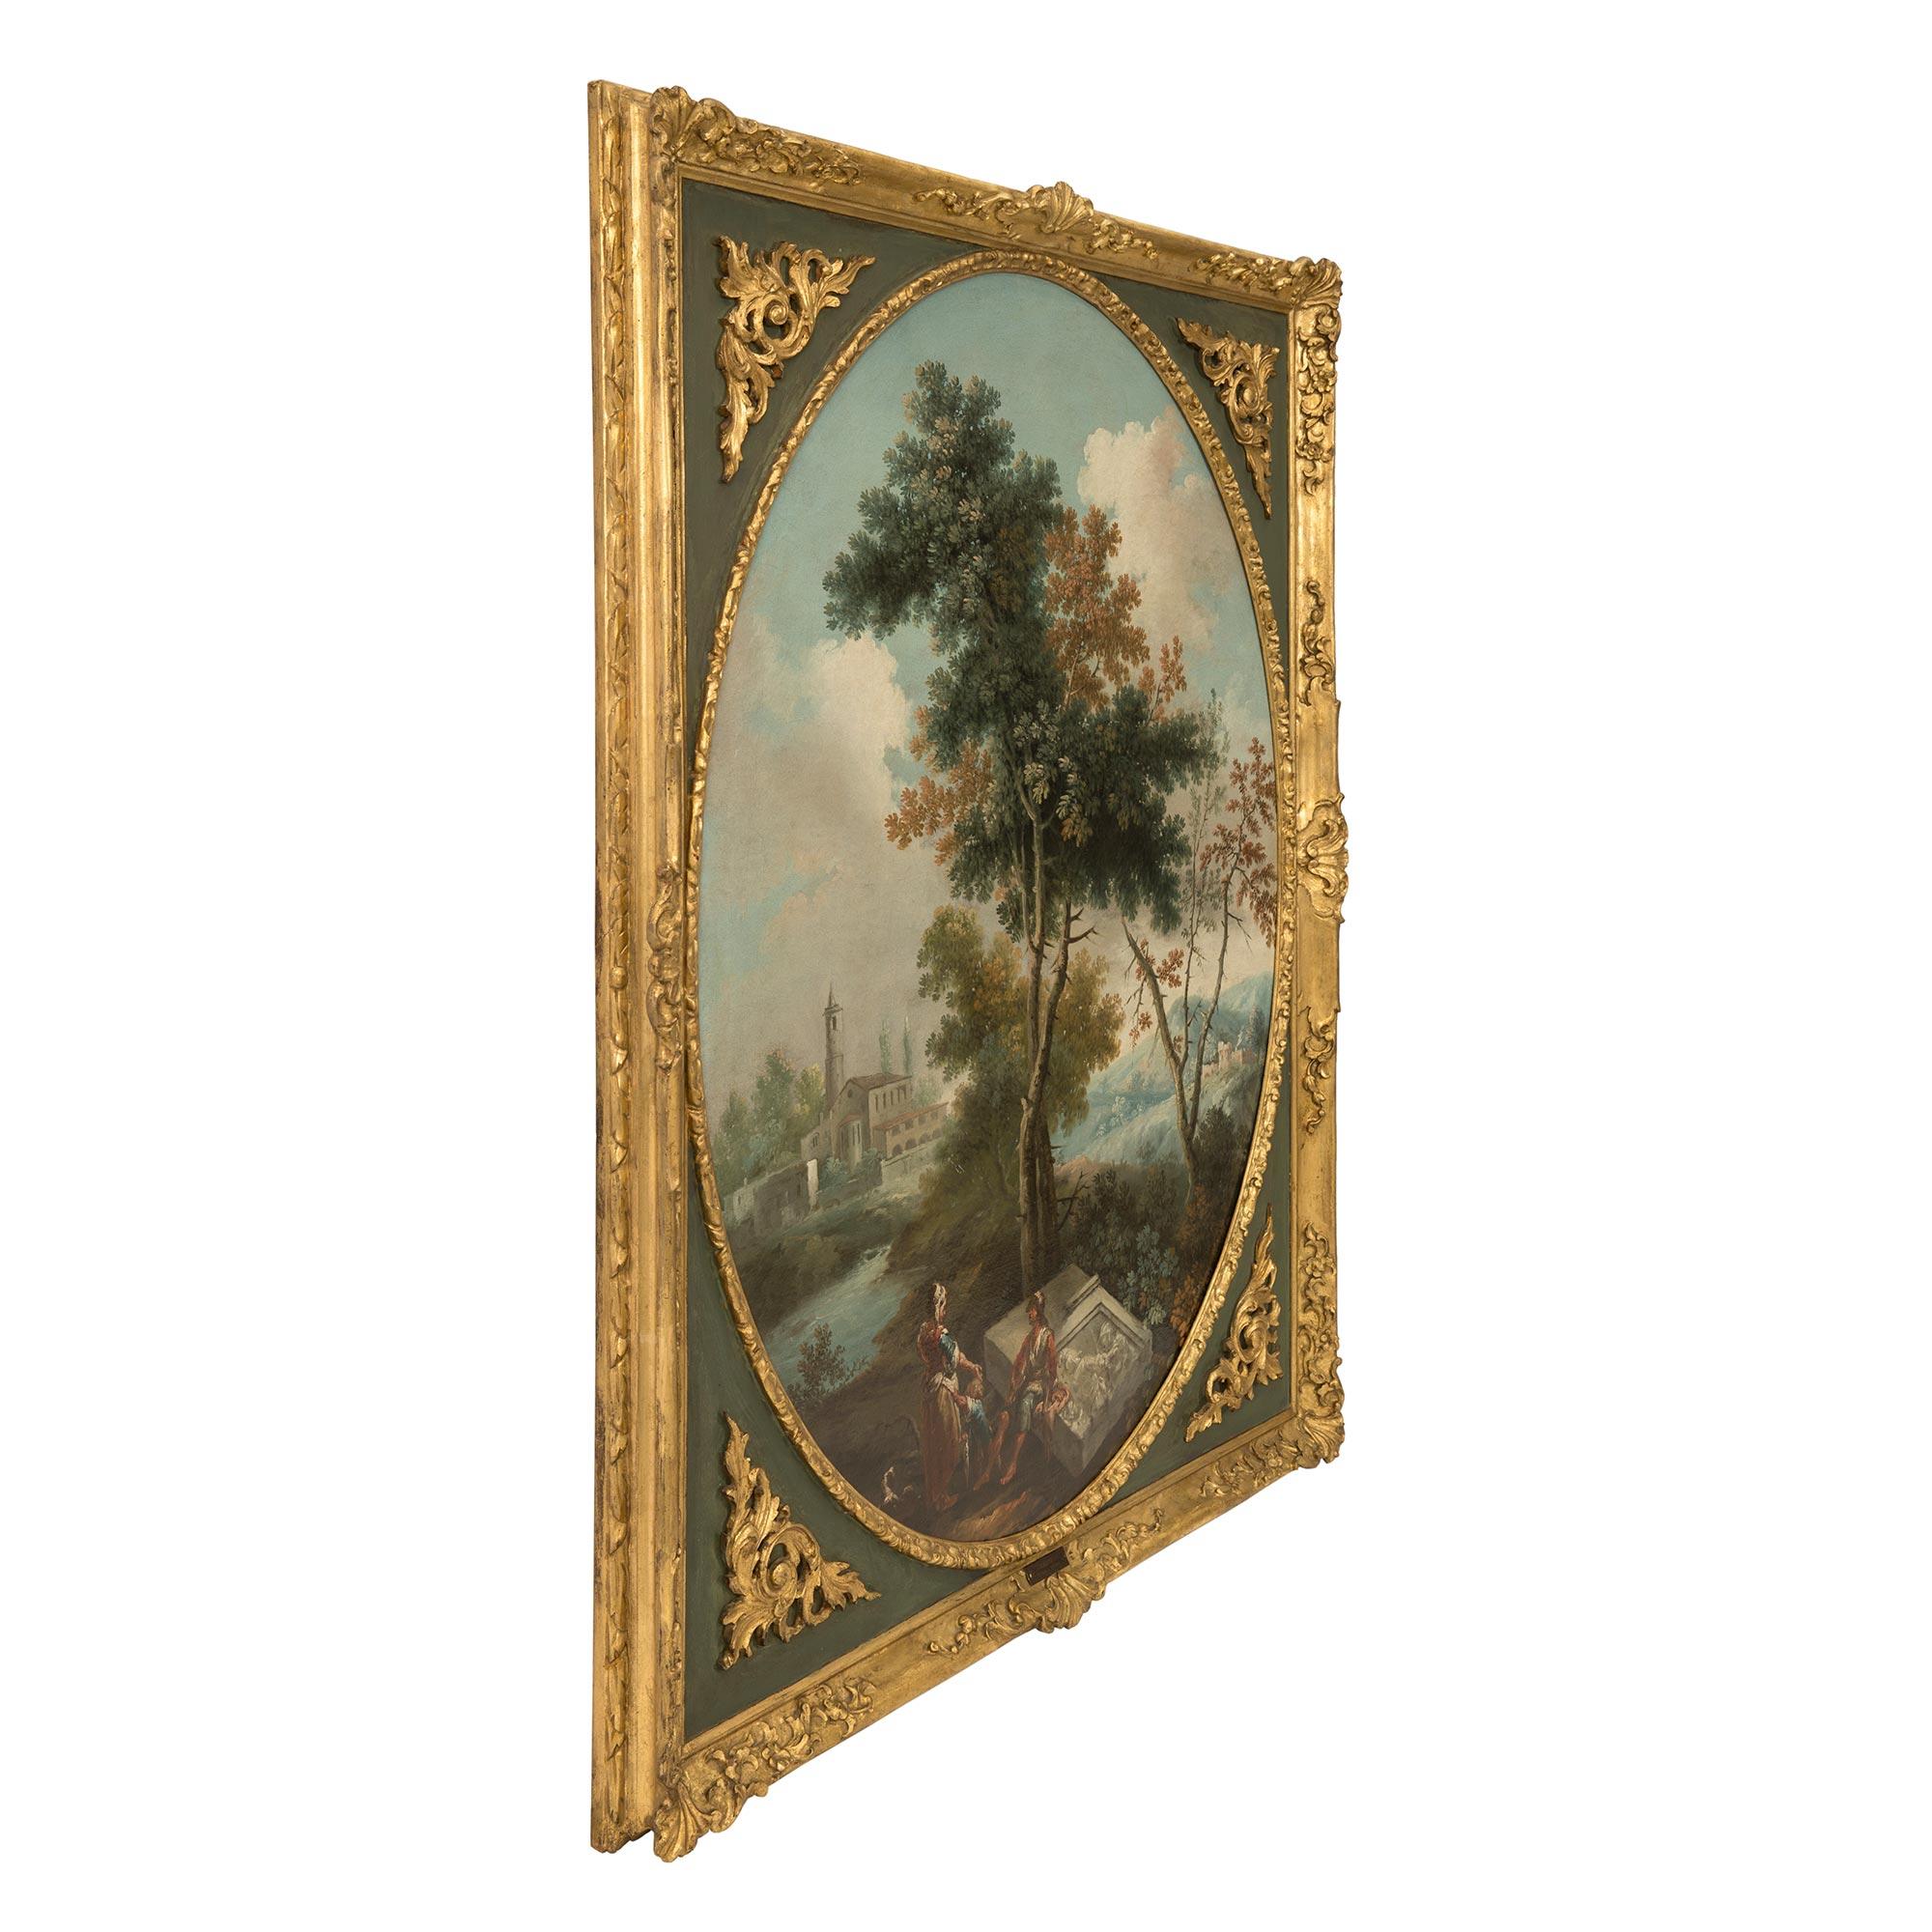 A stunning Italian 18th century Neo-Classical period oil on canvas of a classical landscape scene set in its original giltwood and patinated frame. The charming oval oil on canvas depicts a lovely landscape with a village in the background and a